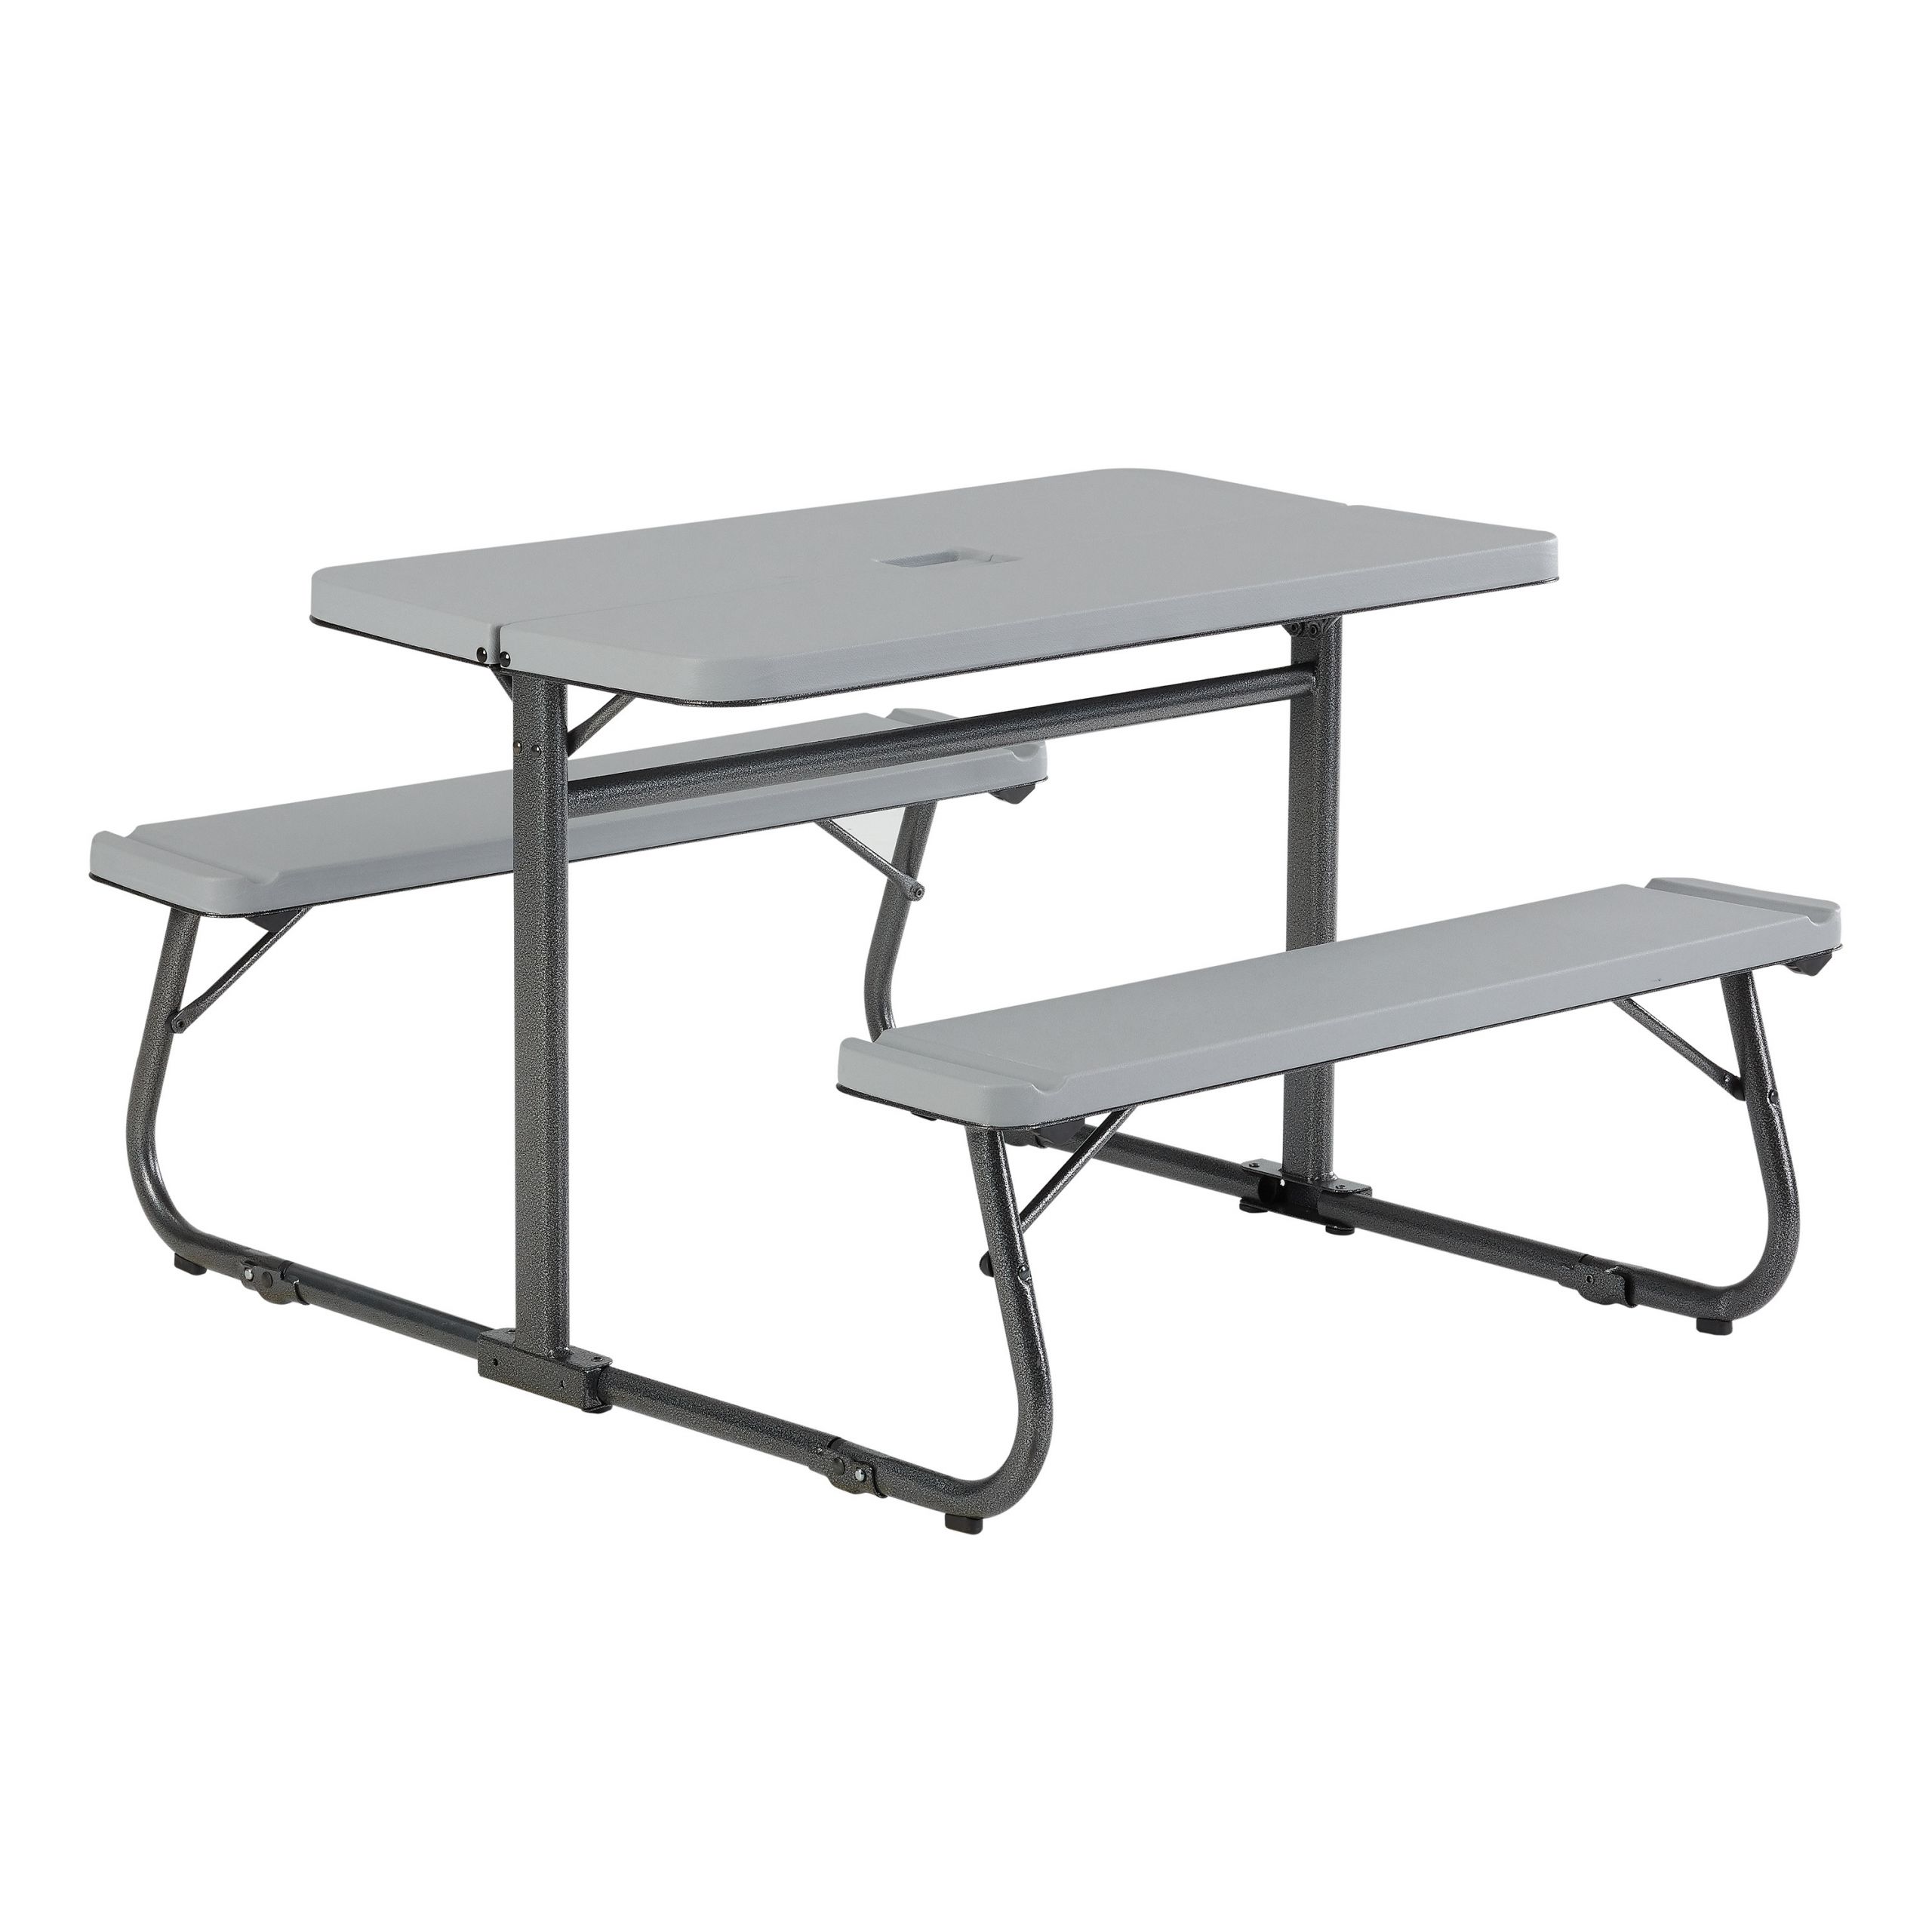 Folding Kids Table
 Your Zone Folding Kid s Activity Table with Two Benches